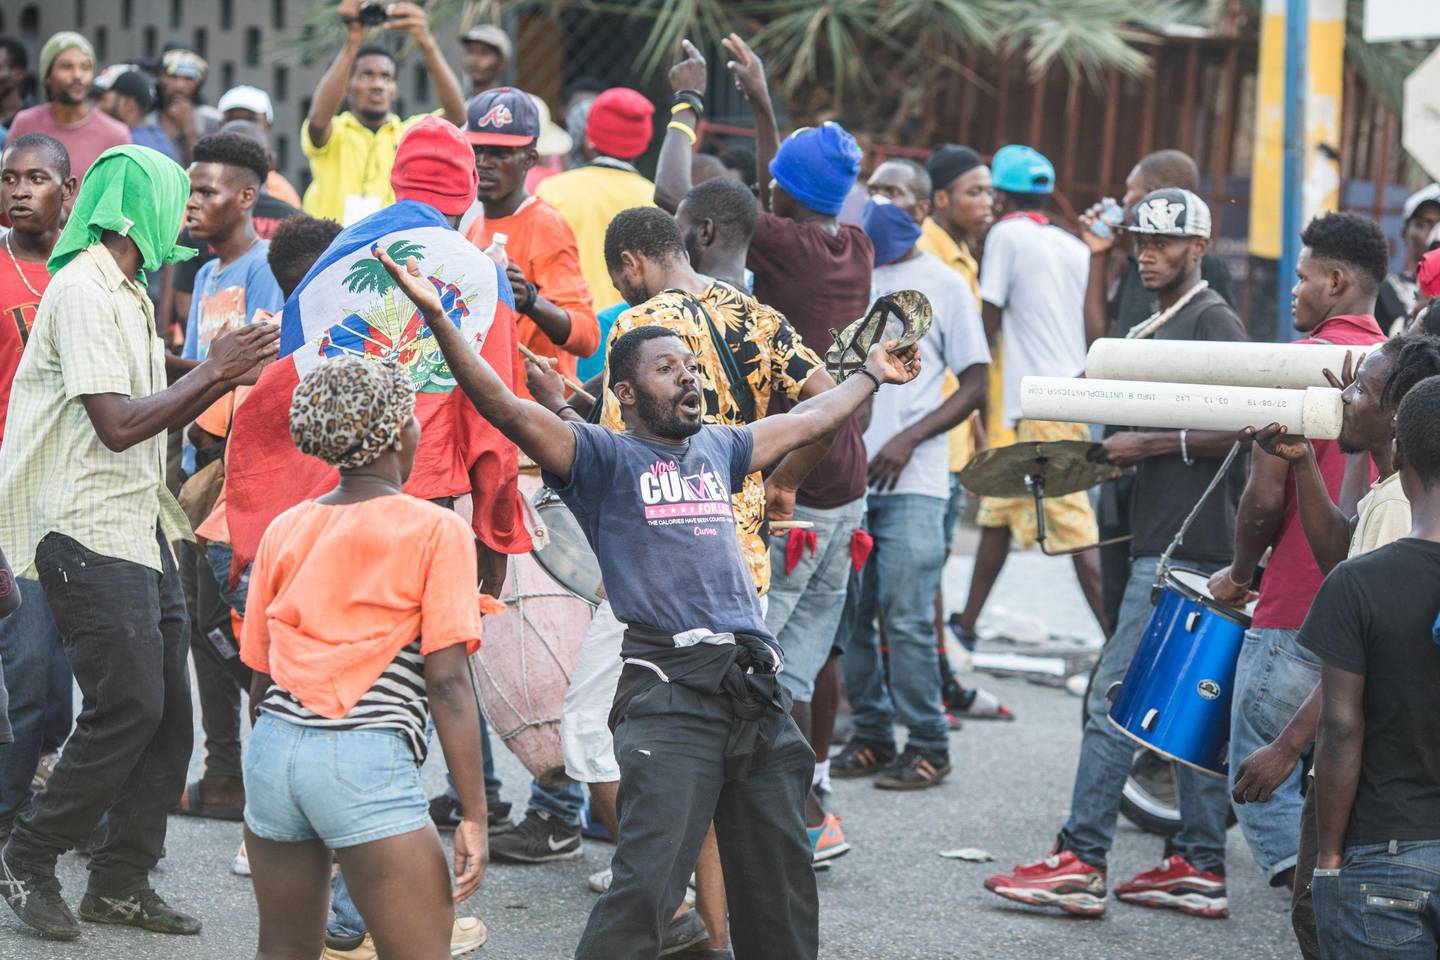 Protesters march to demand the resignation of President Jovenel Moise, in Port-au-Prince, Haiti, on November 10, 2019 after the opponents to the President reached an agreement for a political transition. (Photo by Valerie Baeriswyl / AFP)